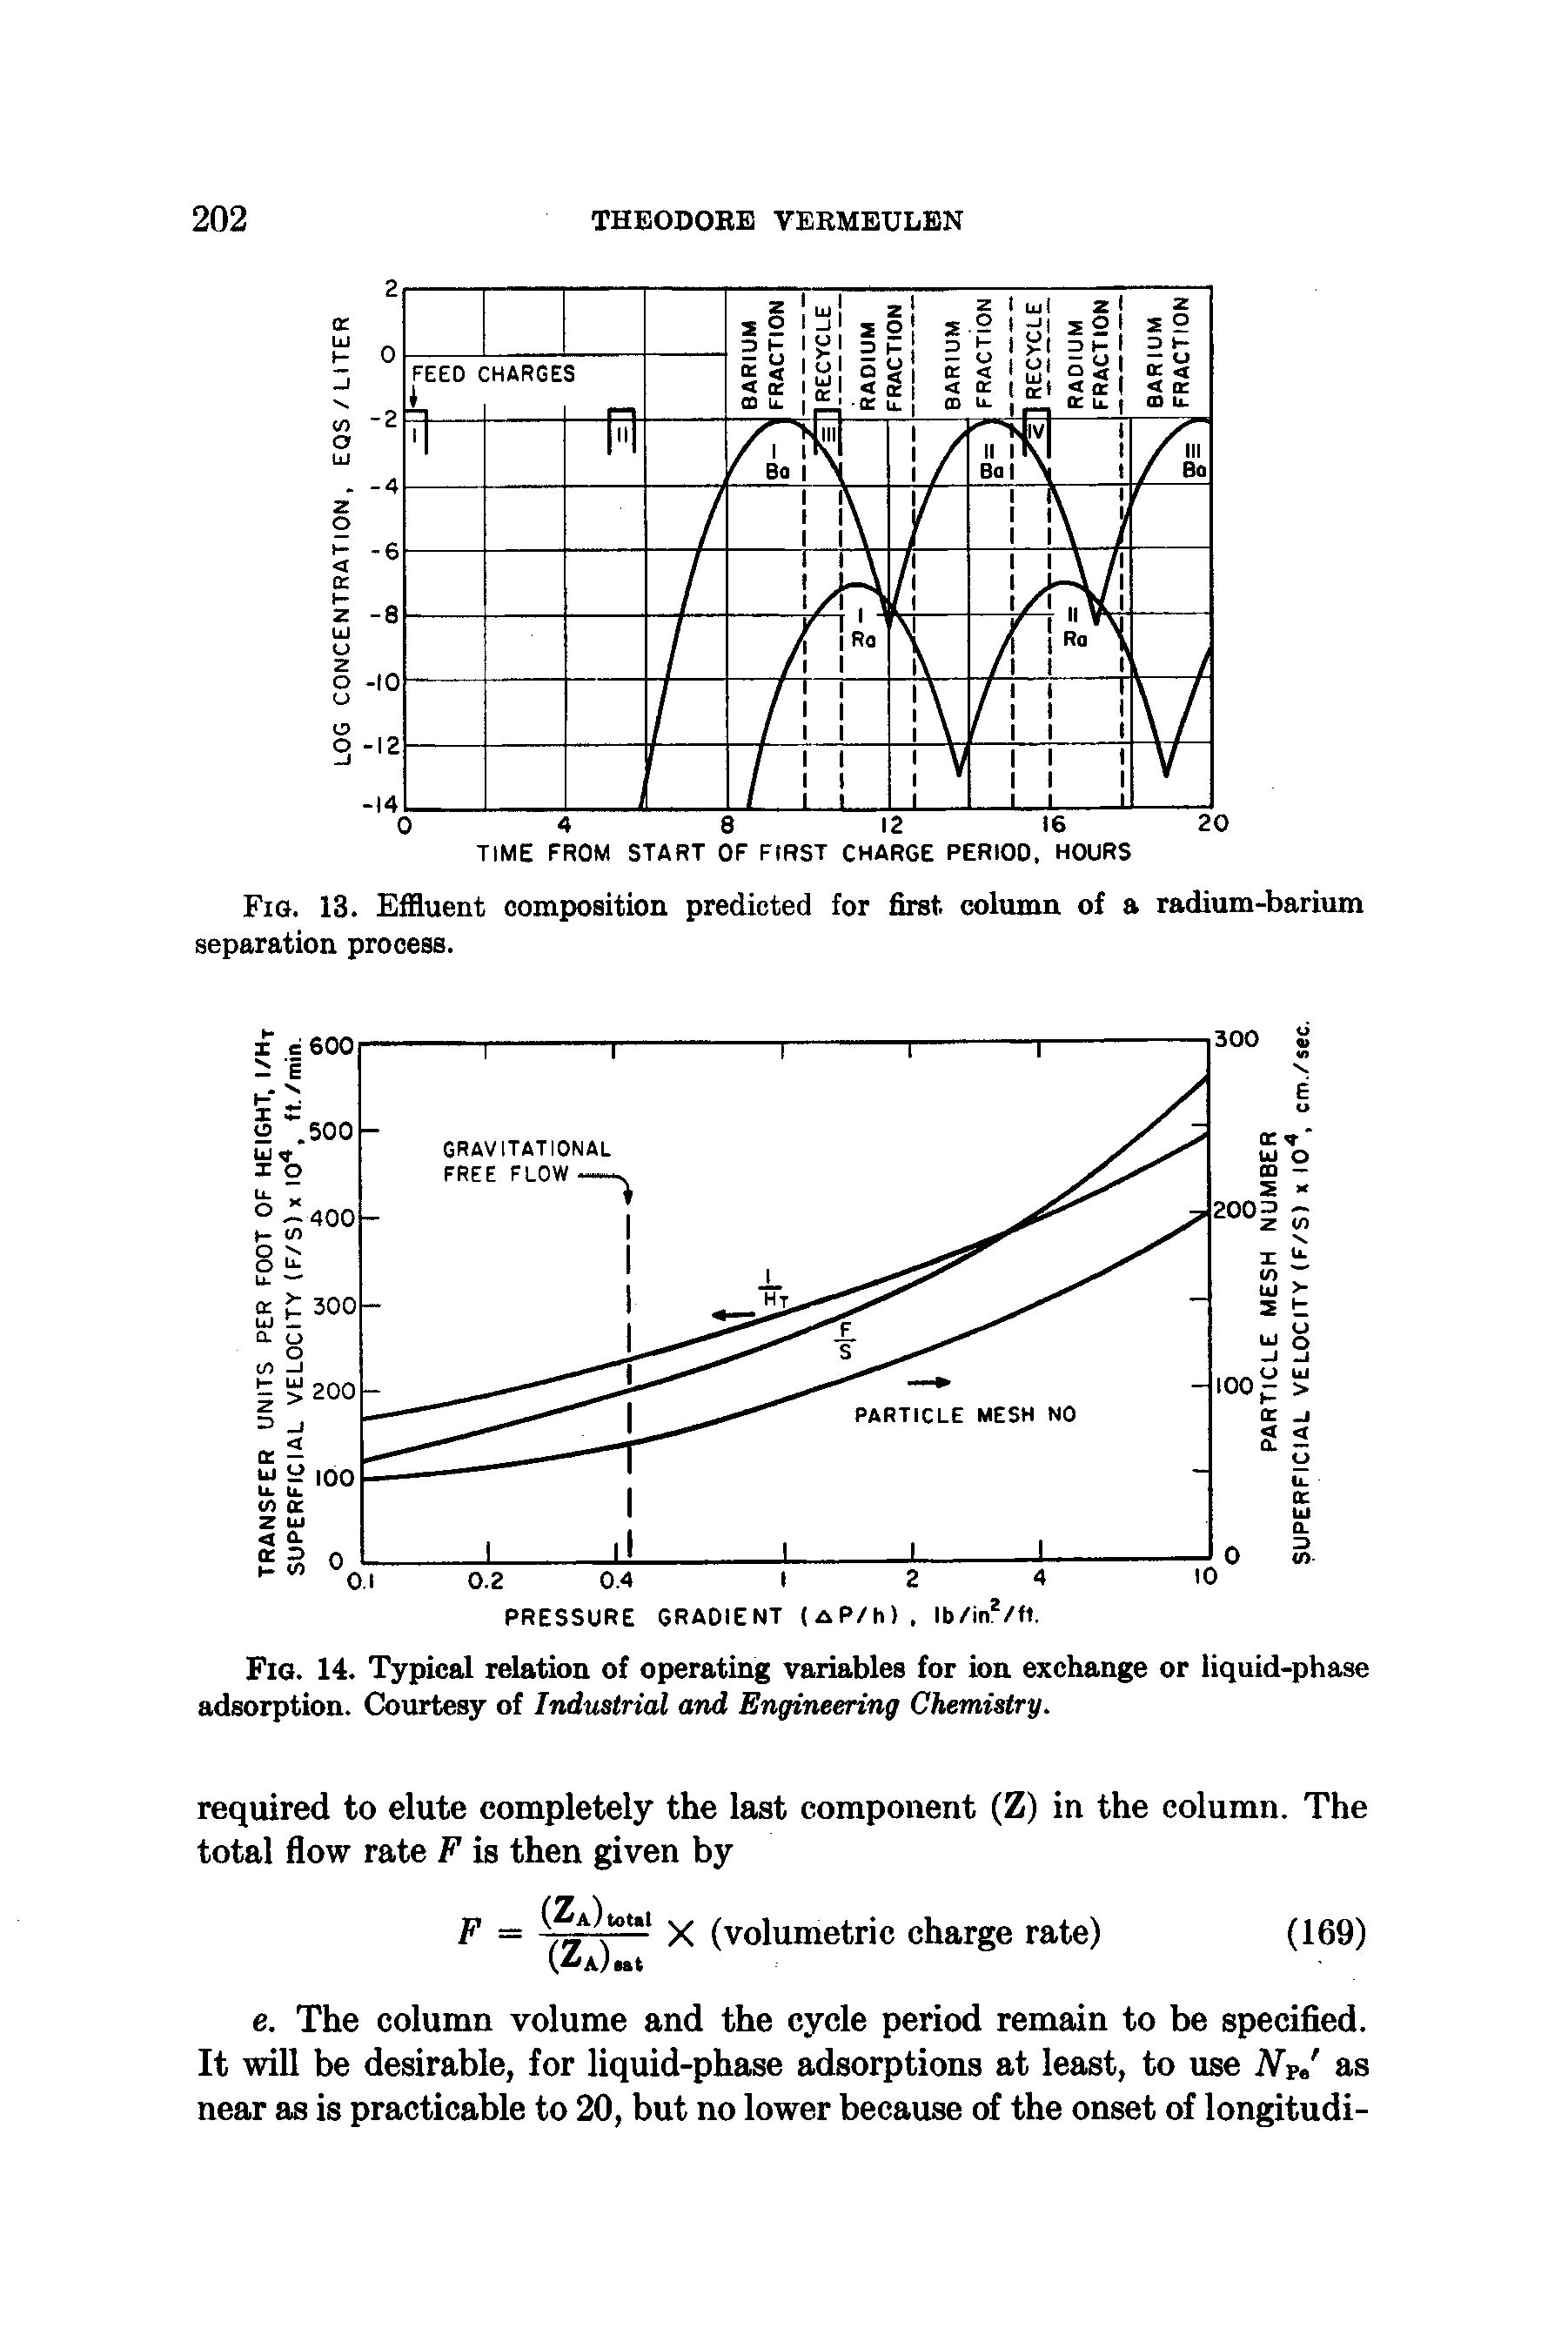 Fig. 13. Effluent composition predicted for first column of a radium-barium separation process.